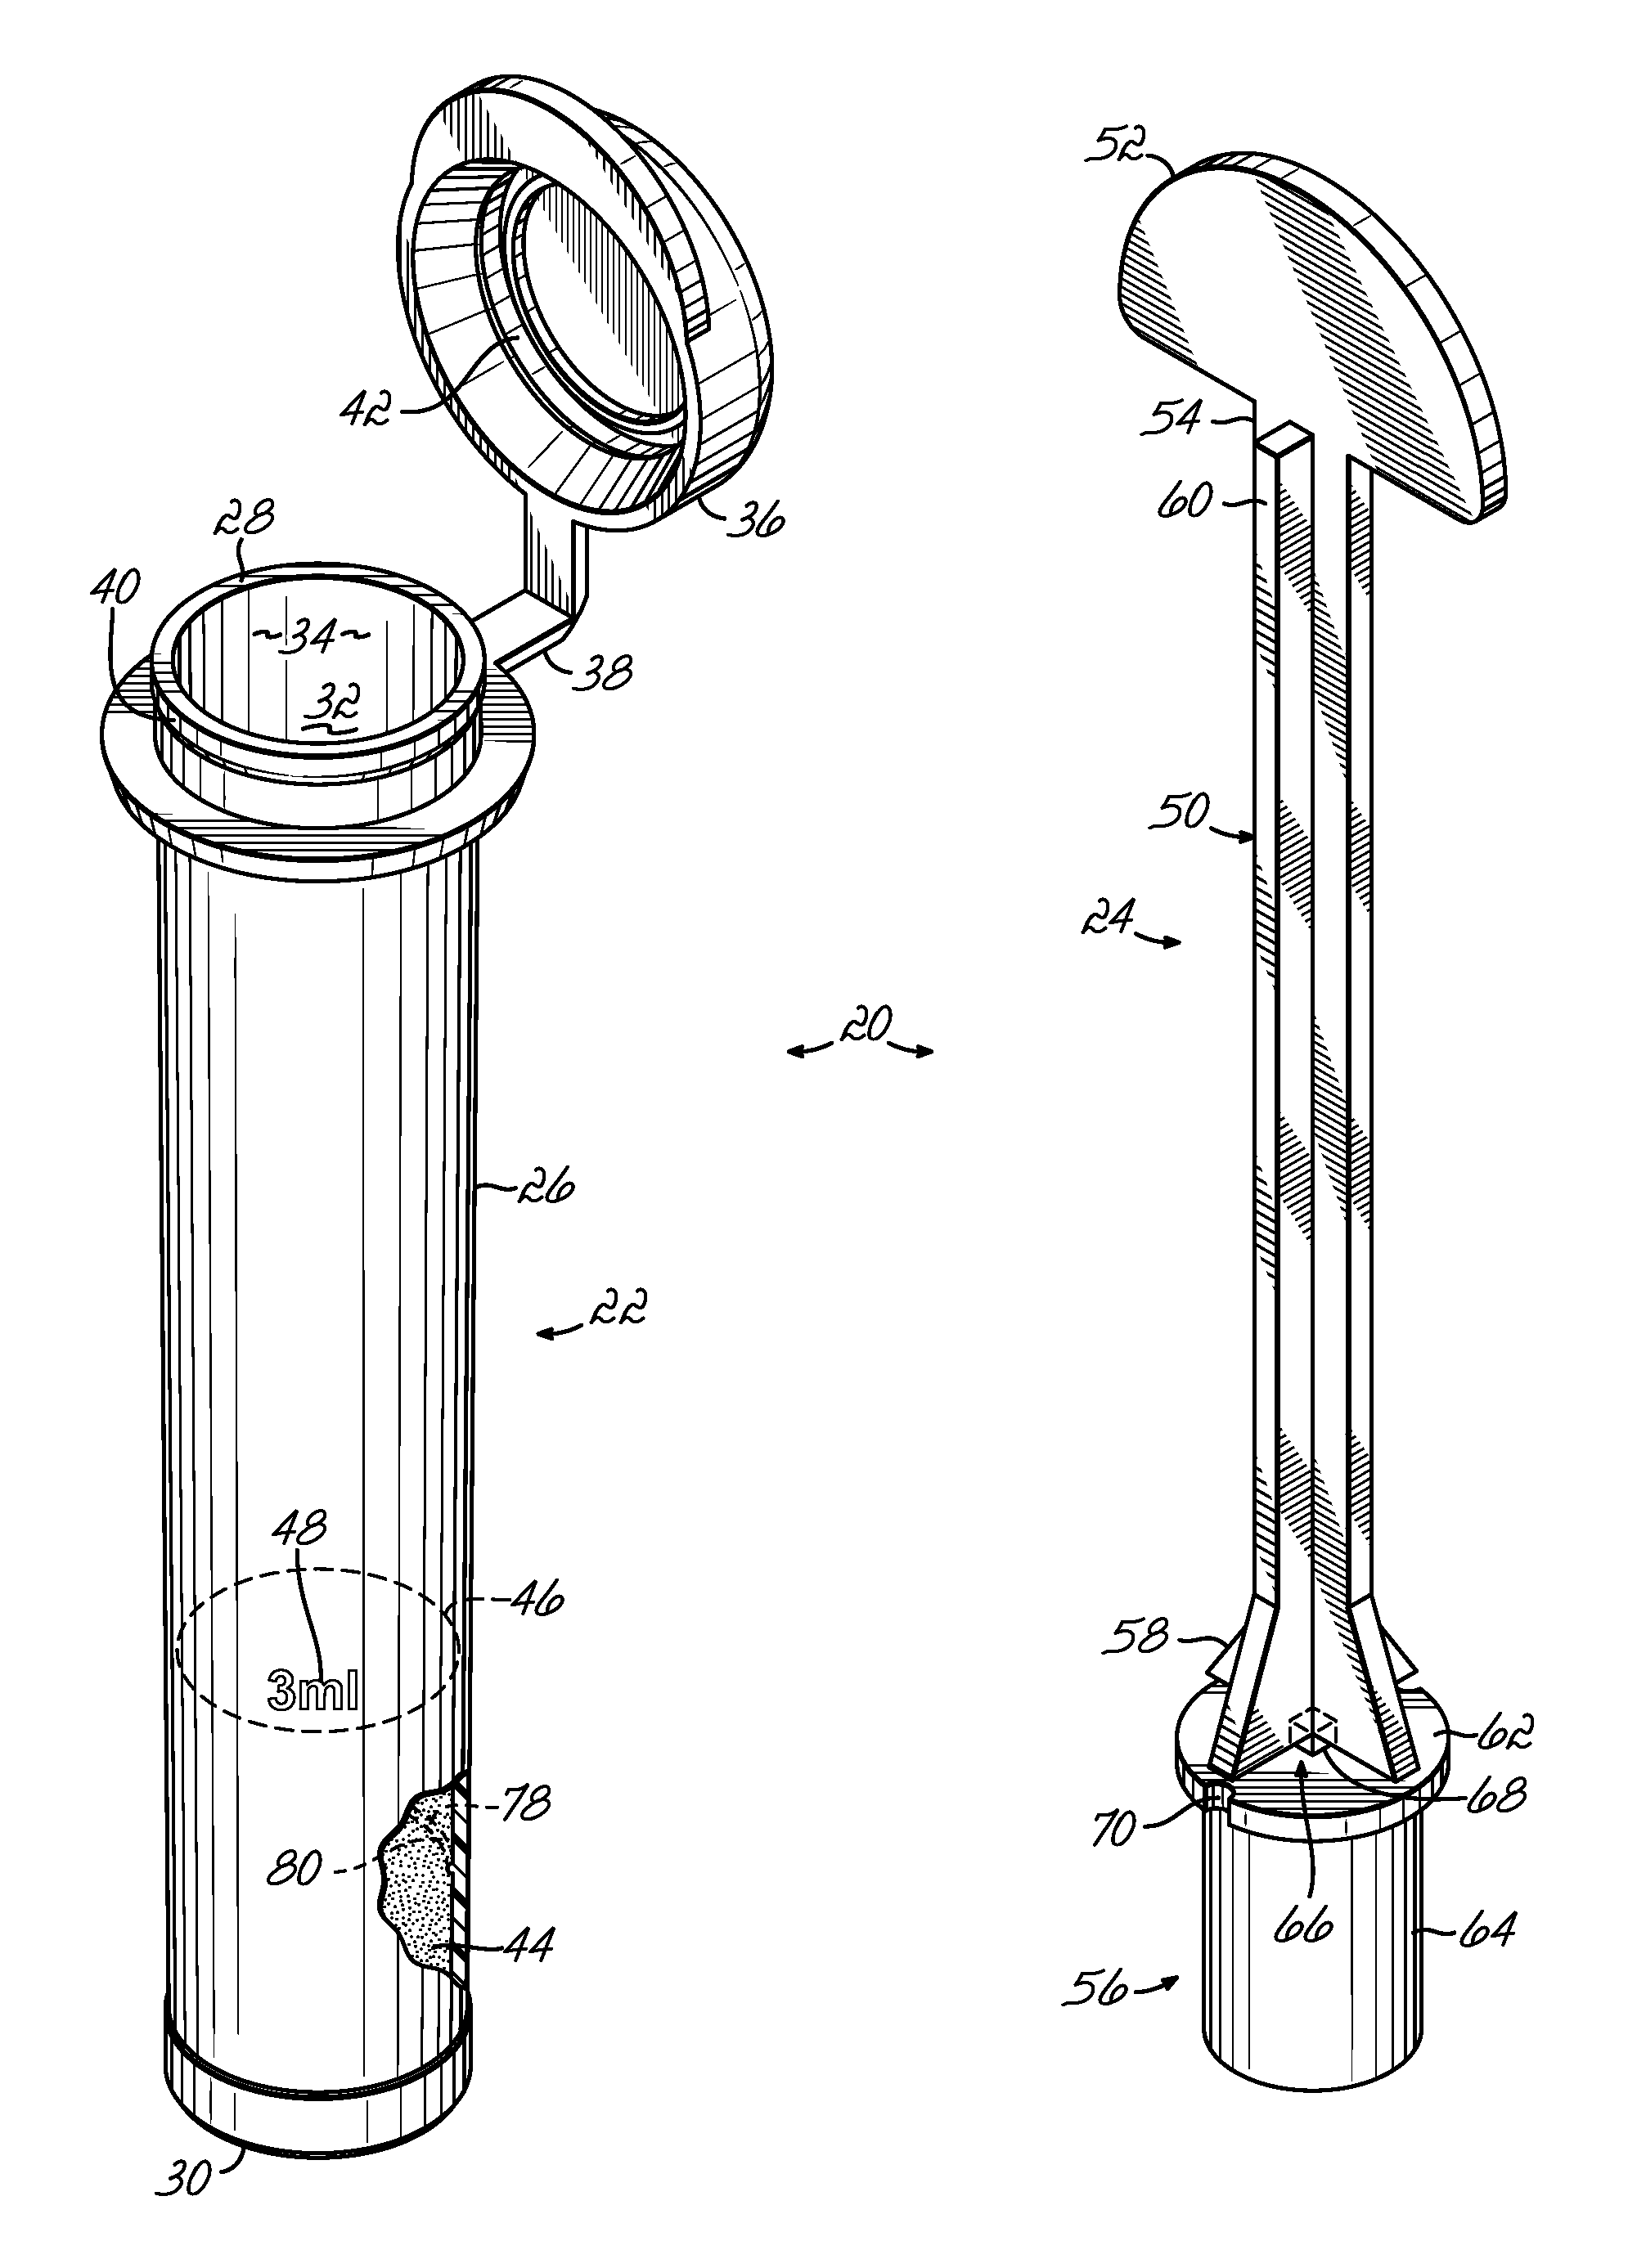 Sample collection system and method